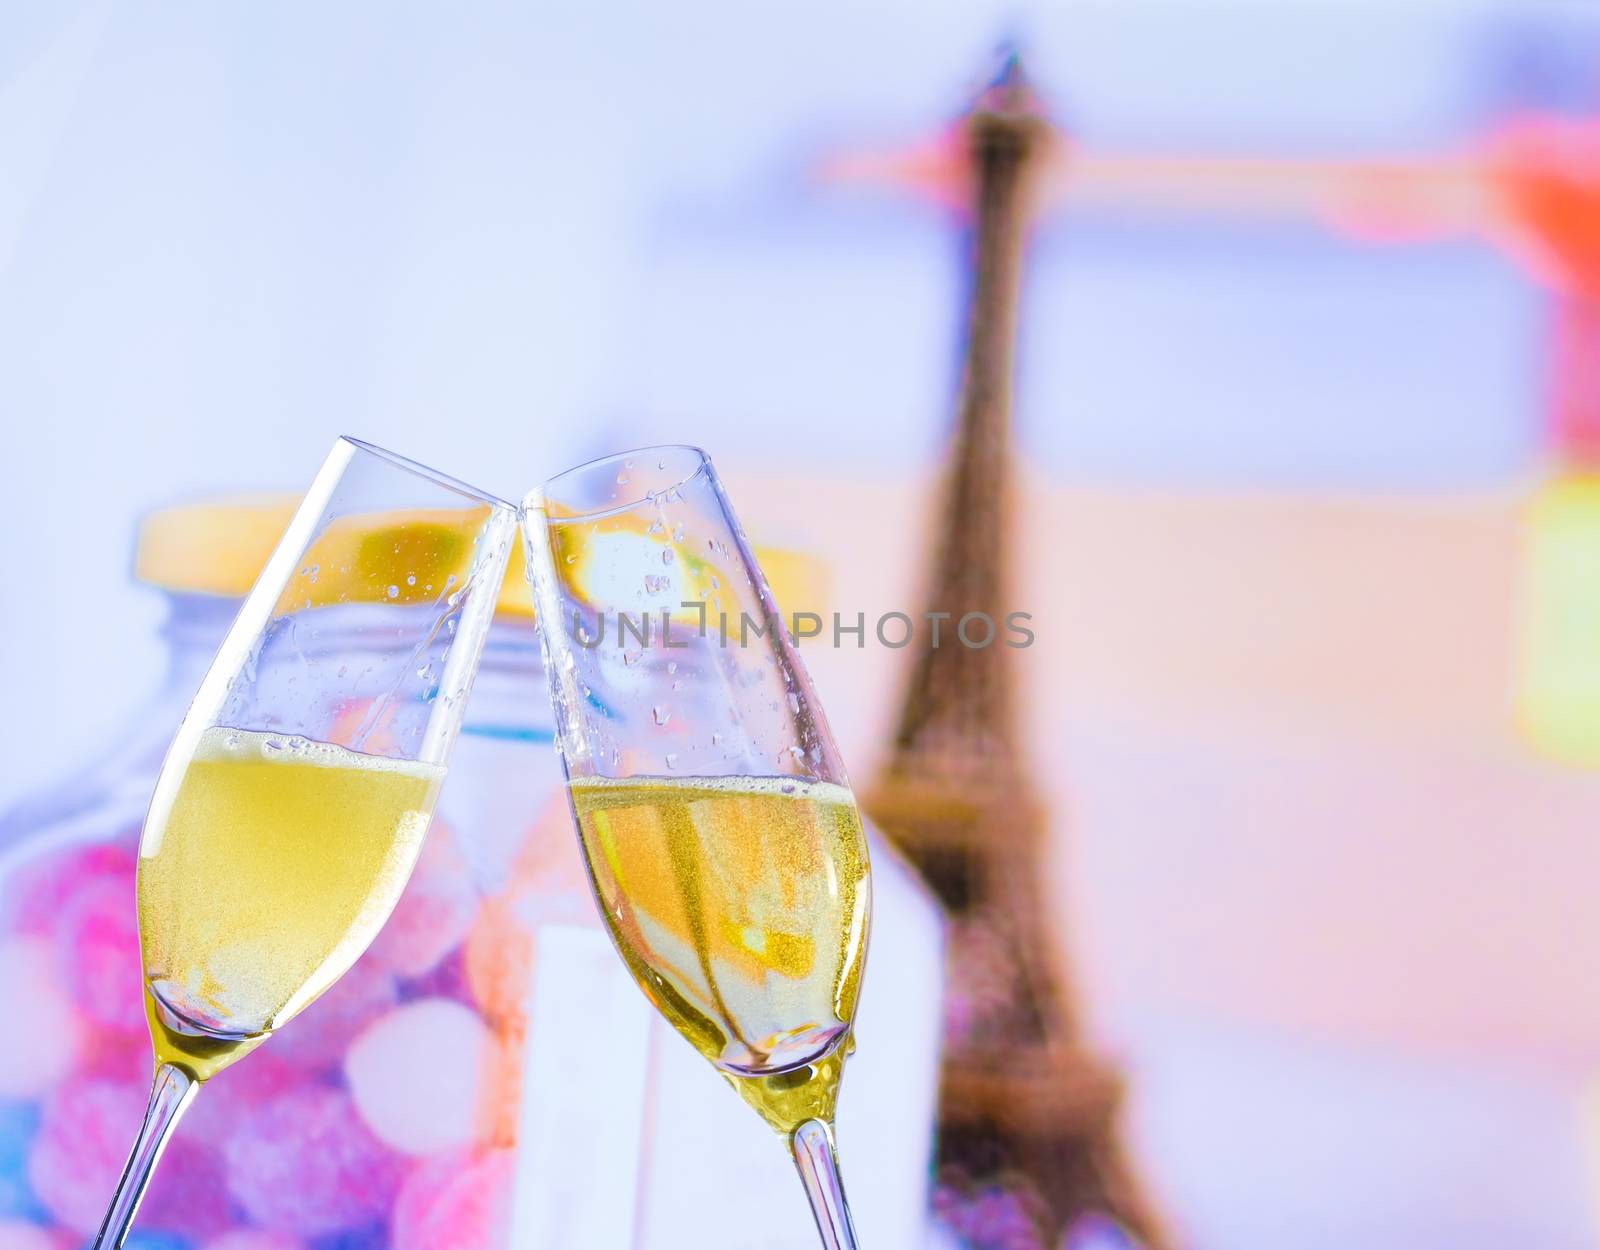 a pair of champagne flutes with golden bubbles on blur tower Eiffel background by donfiore